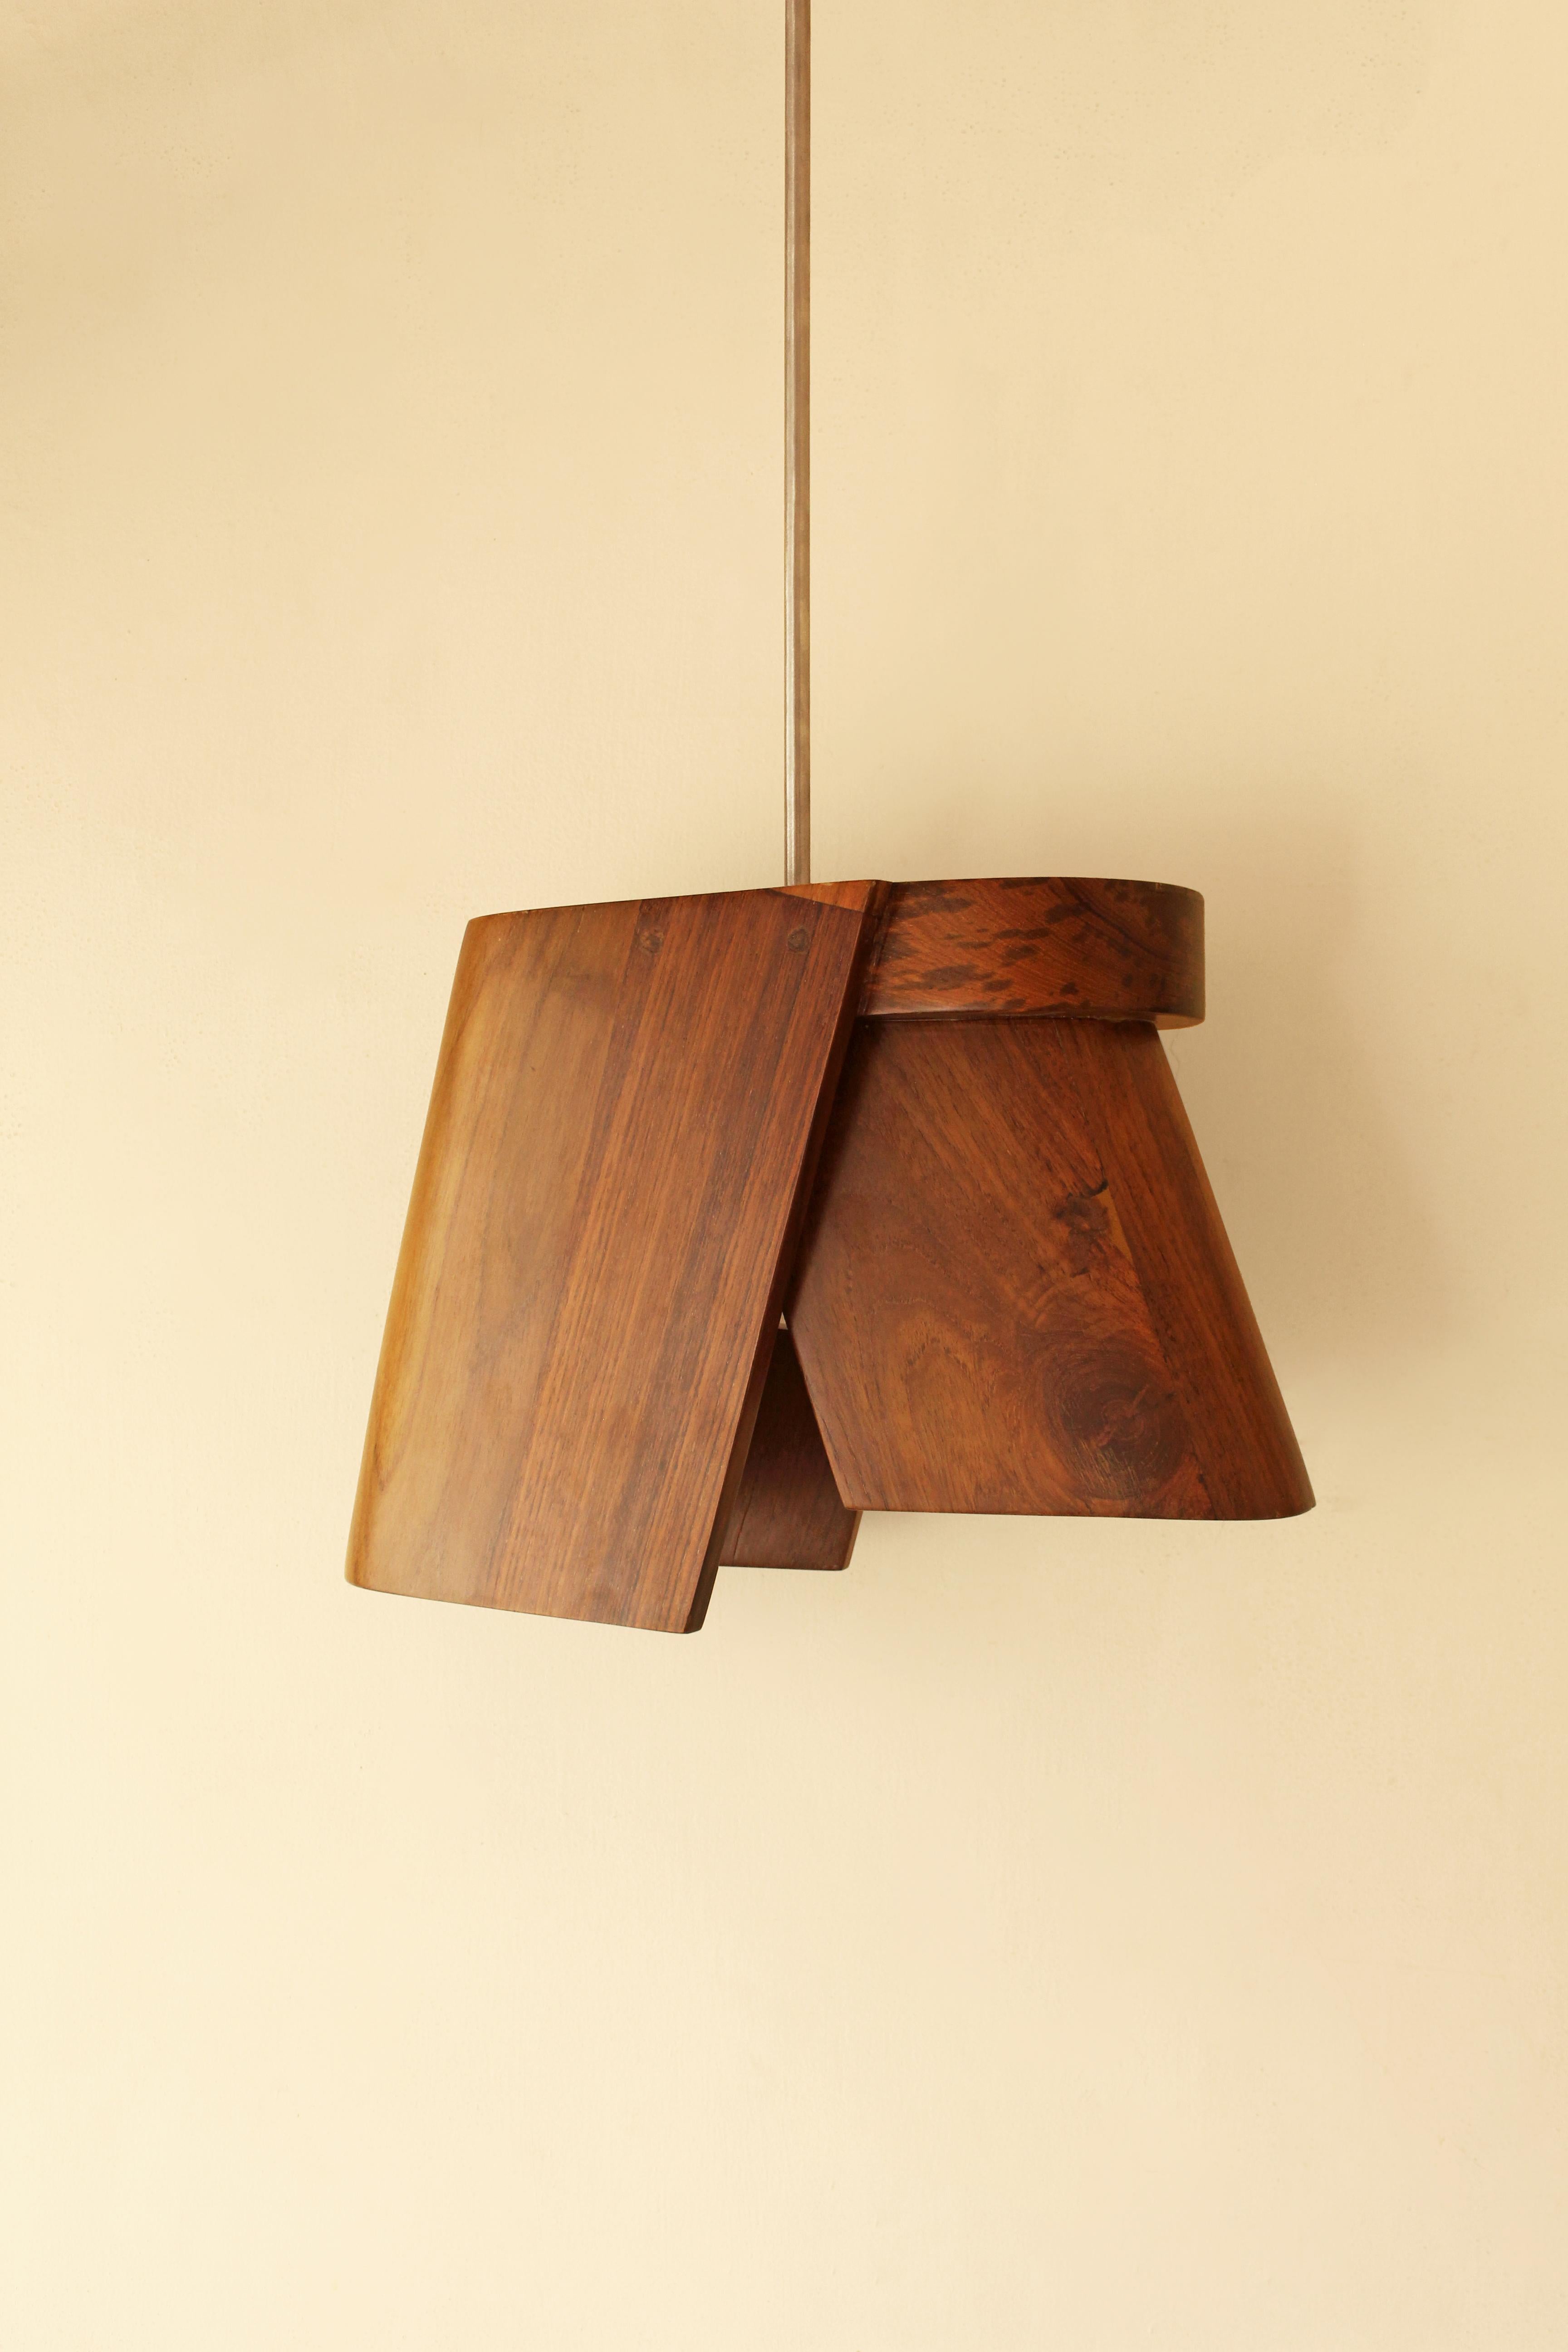 Aavaran Pendant Light by Studio Indigene
Dimensions: D 40.64 x W 14 x H 27.94 cm
Materials: Reclaimed Teak Wood & Stainless Steel (suspension rod). 
Colors Brown, Natural Wooden Finish.

Hand-carved out of solid reclaimed teak wood, Aavaran throws a